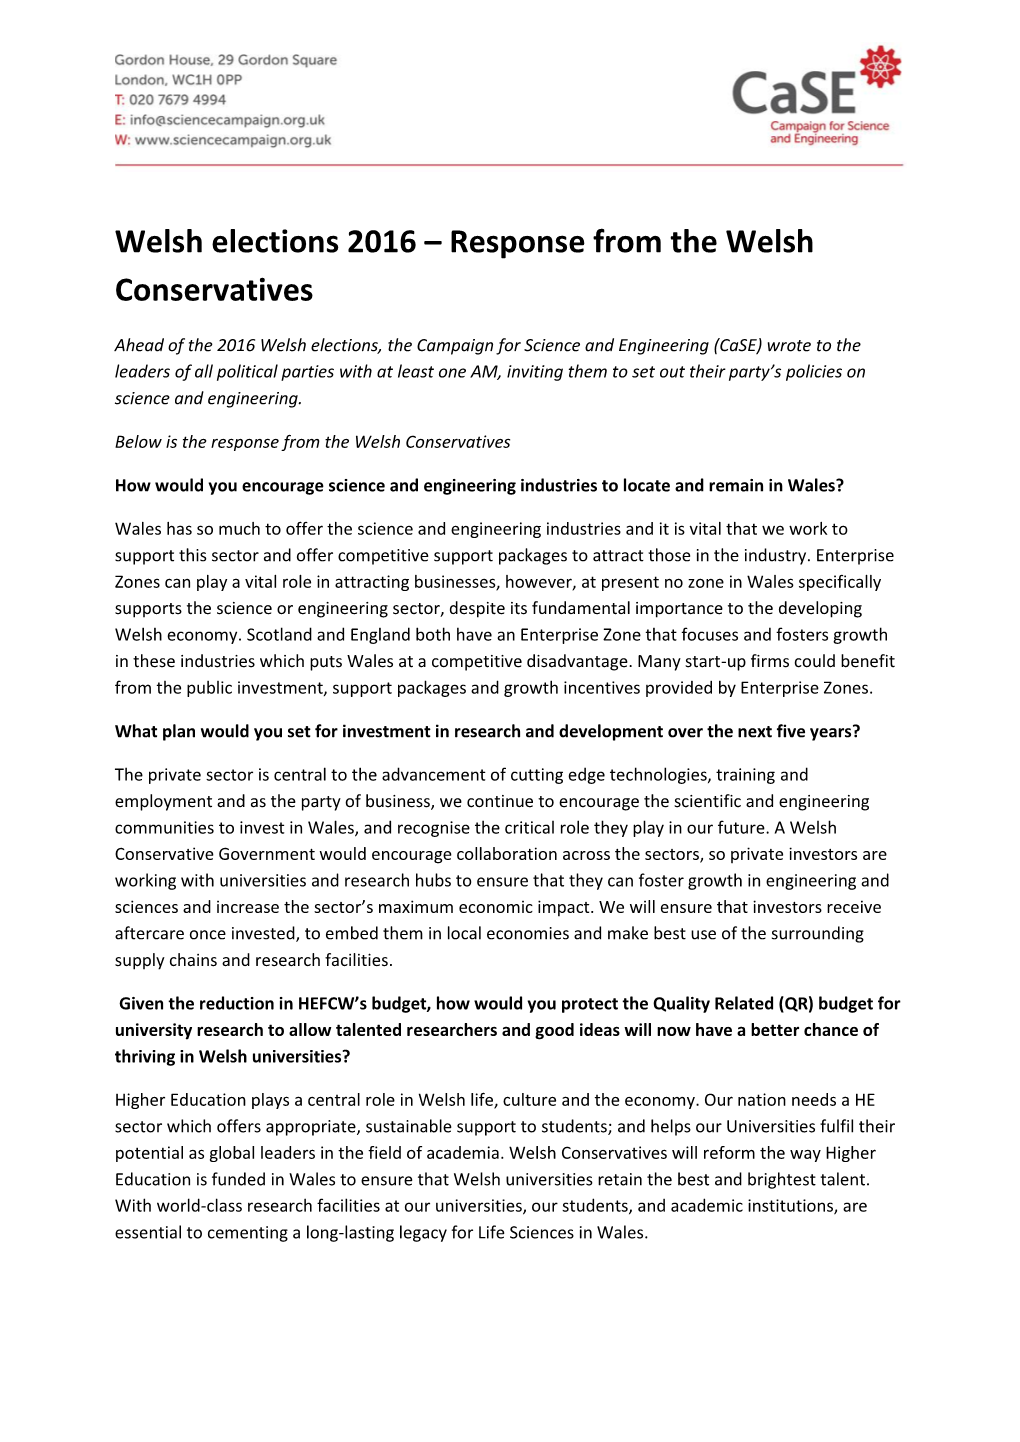 Response from the Welsh Conservatives